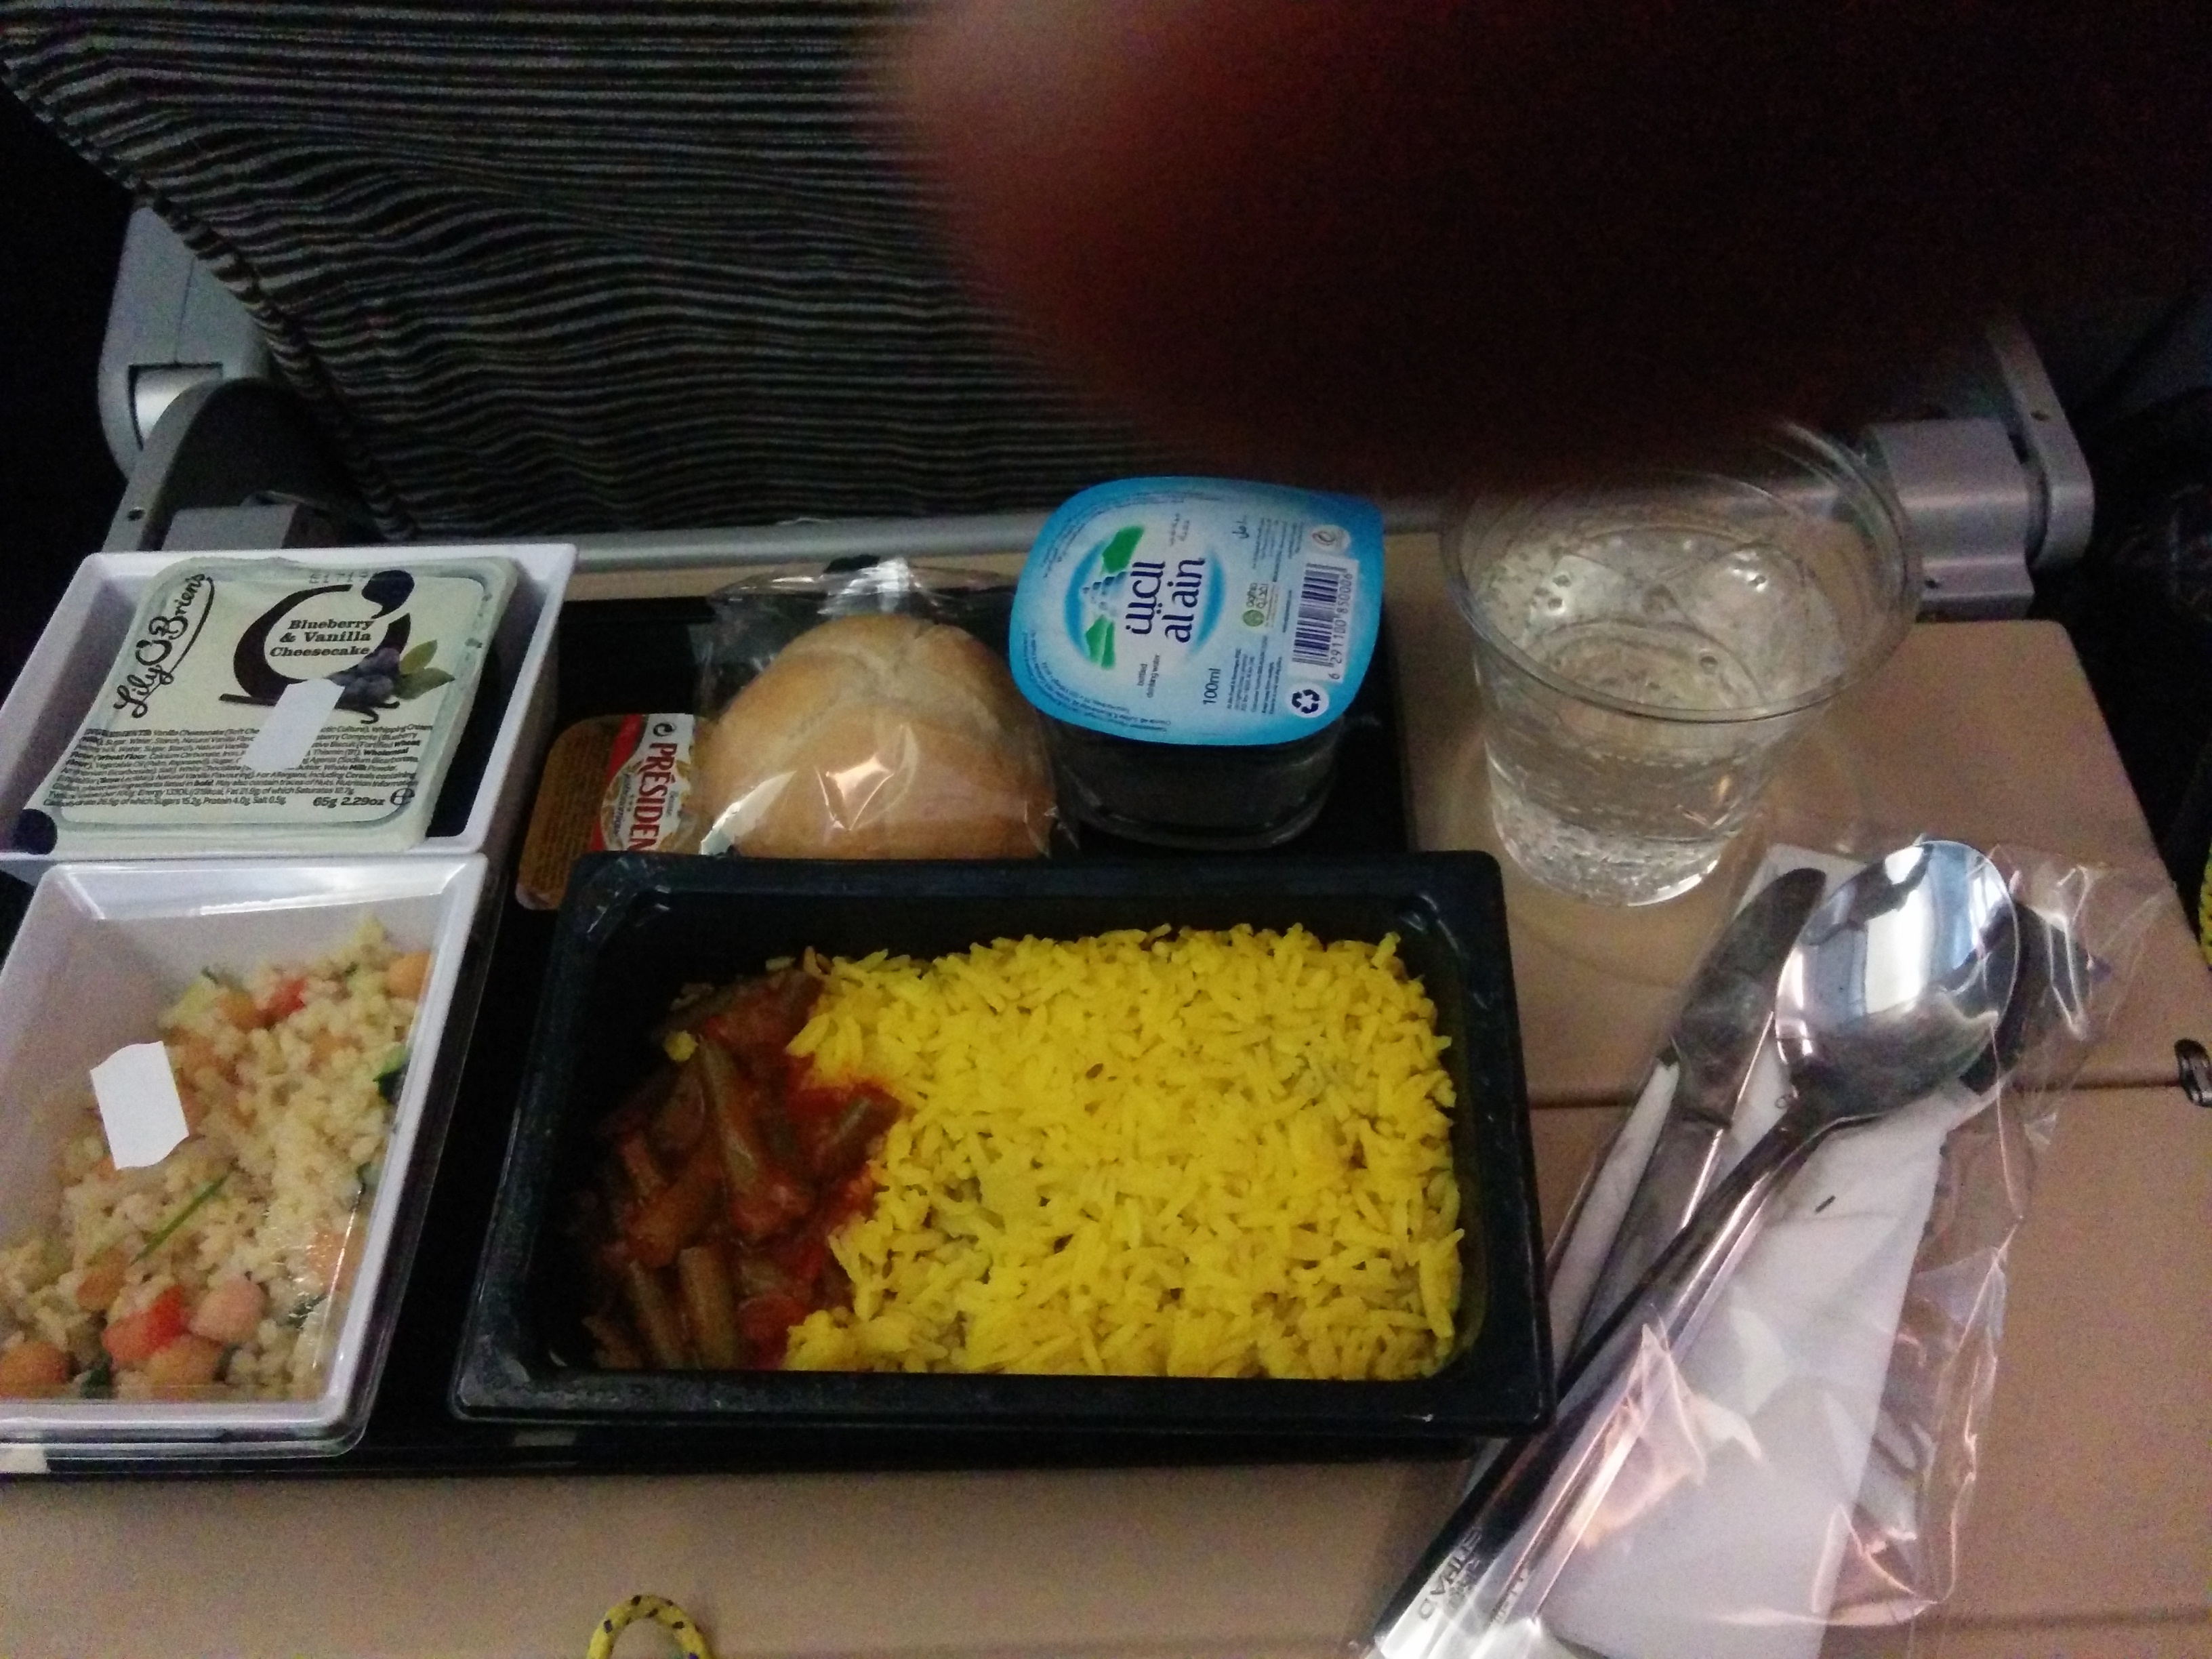 Some lamb with rice. Meh quality as all airplane food.